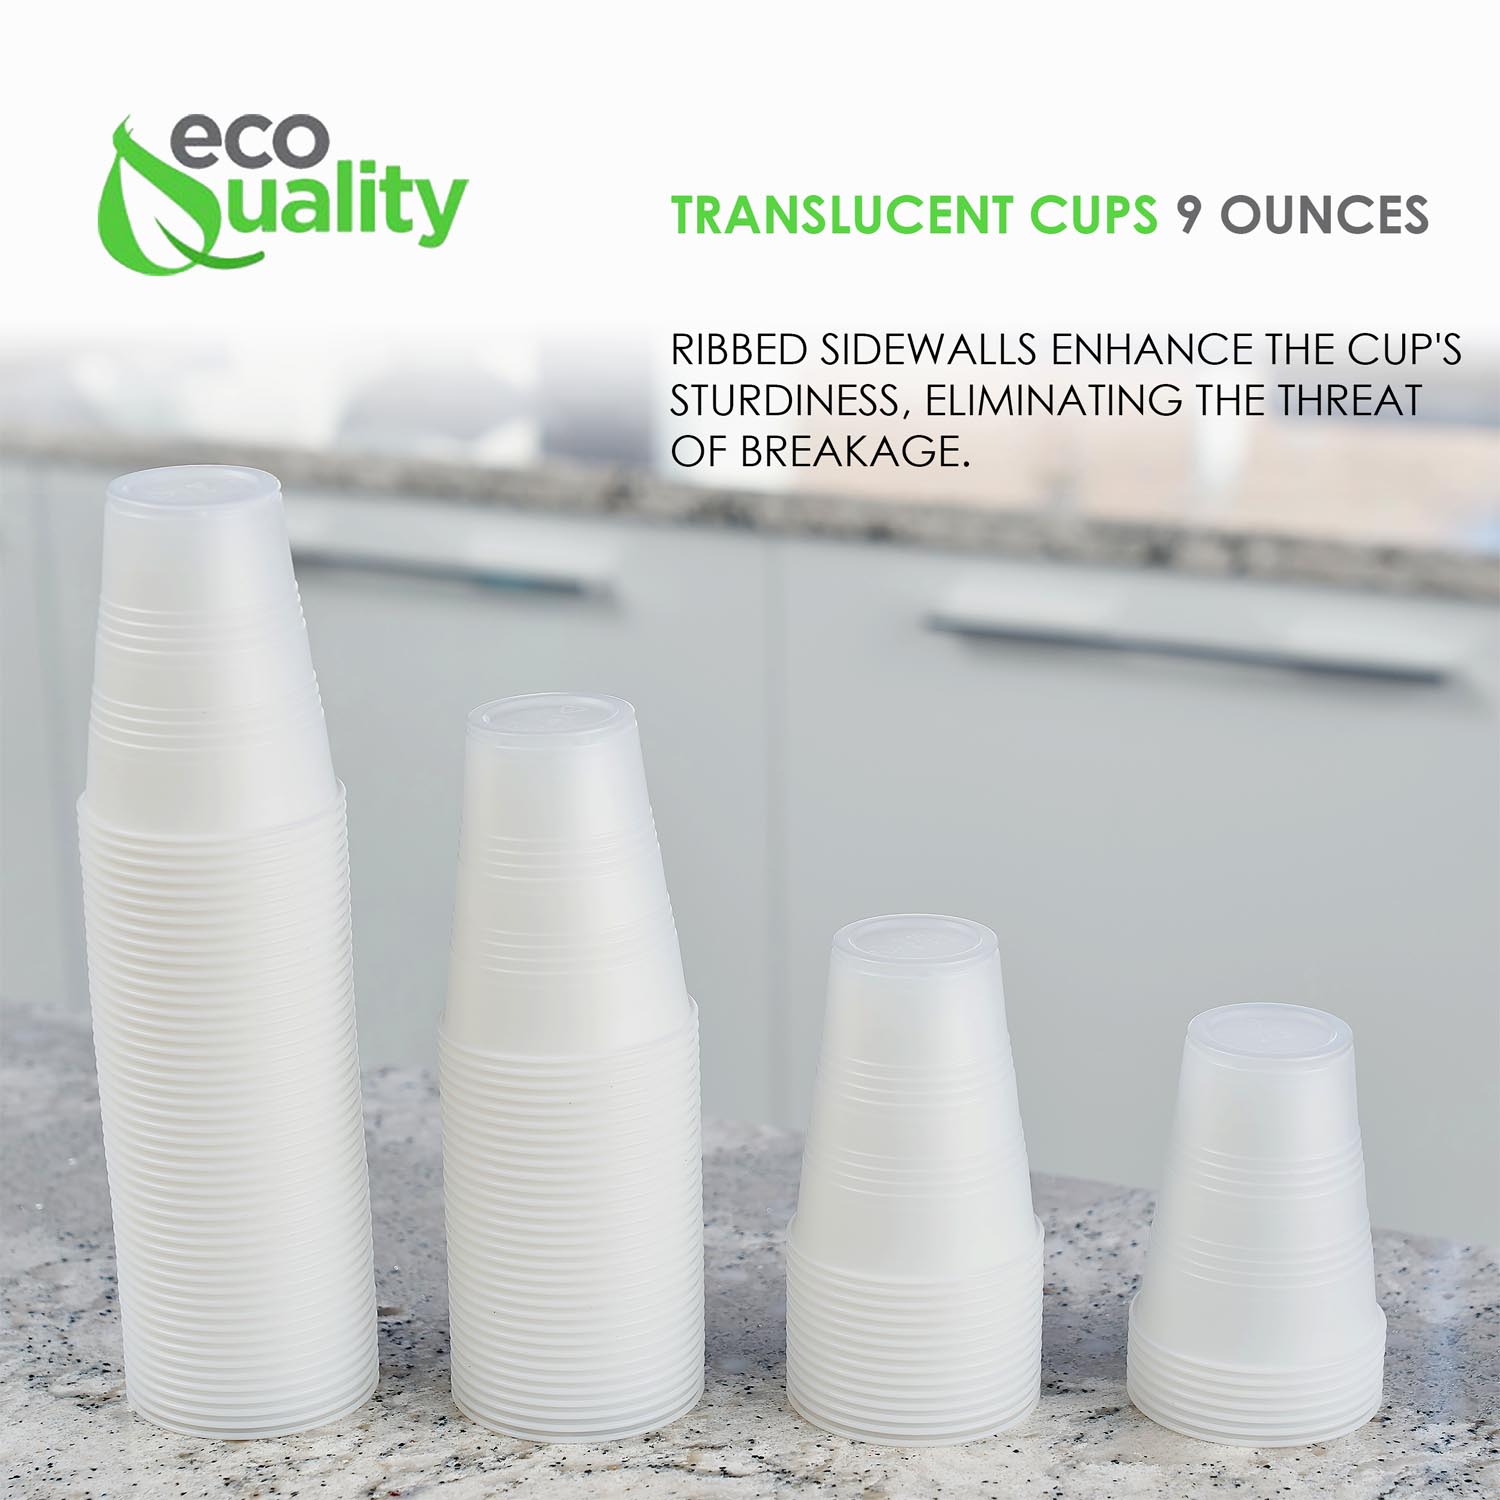 BBQ Cups  Soda Cups  Party Cups  Disposable Cups  disposable plastic cups  BPA Free  Clear Cups  Cold Drink Cups  9oz  9 ounces  Translucent Plastic Cups  Translucent Cups  Plastic Drinking Cup  cups  Clear Plastic Cups  Clear PET Drinking Cups  Clear Drinking Cups